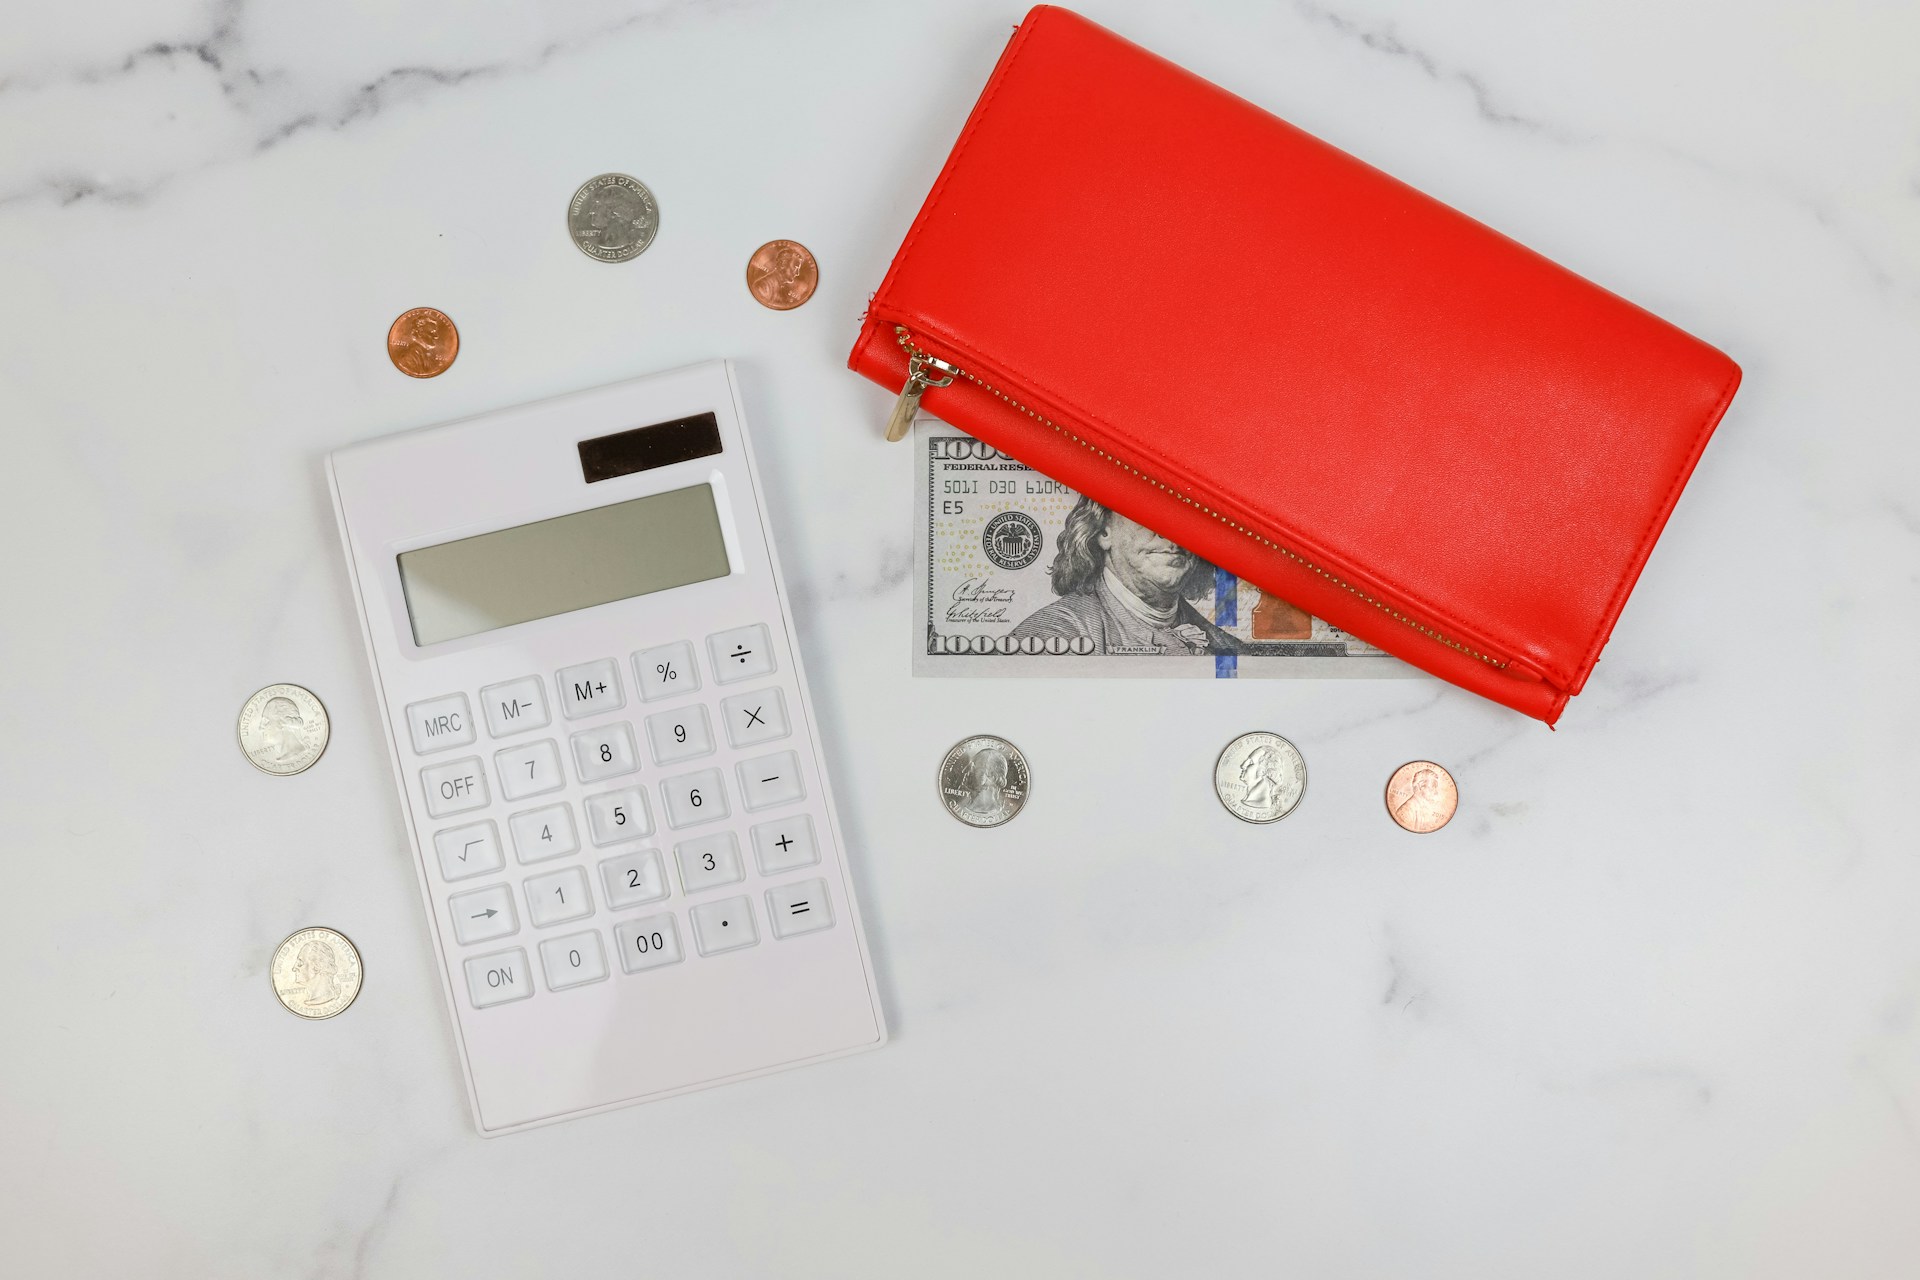 A red wallet next to dollar bills and coins on a marble countertop.